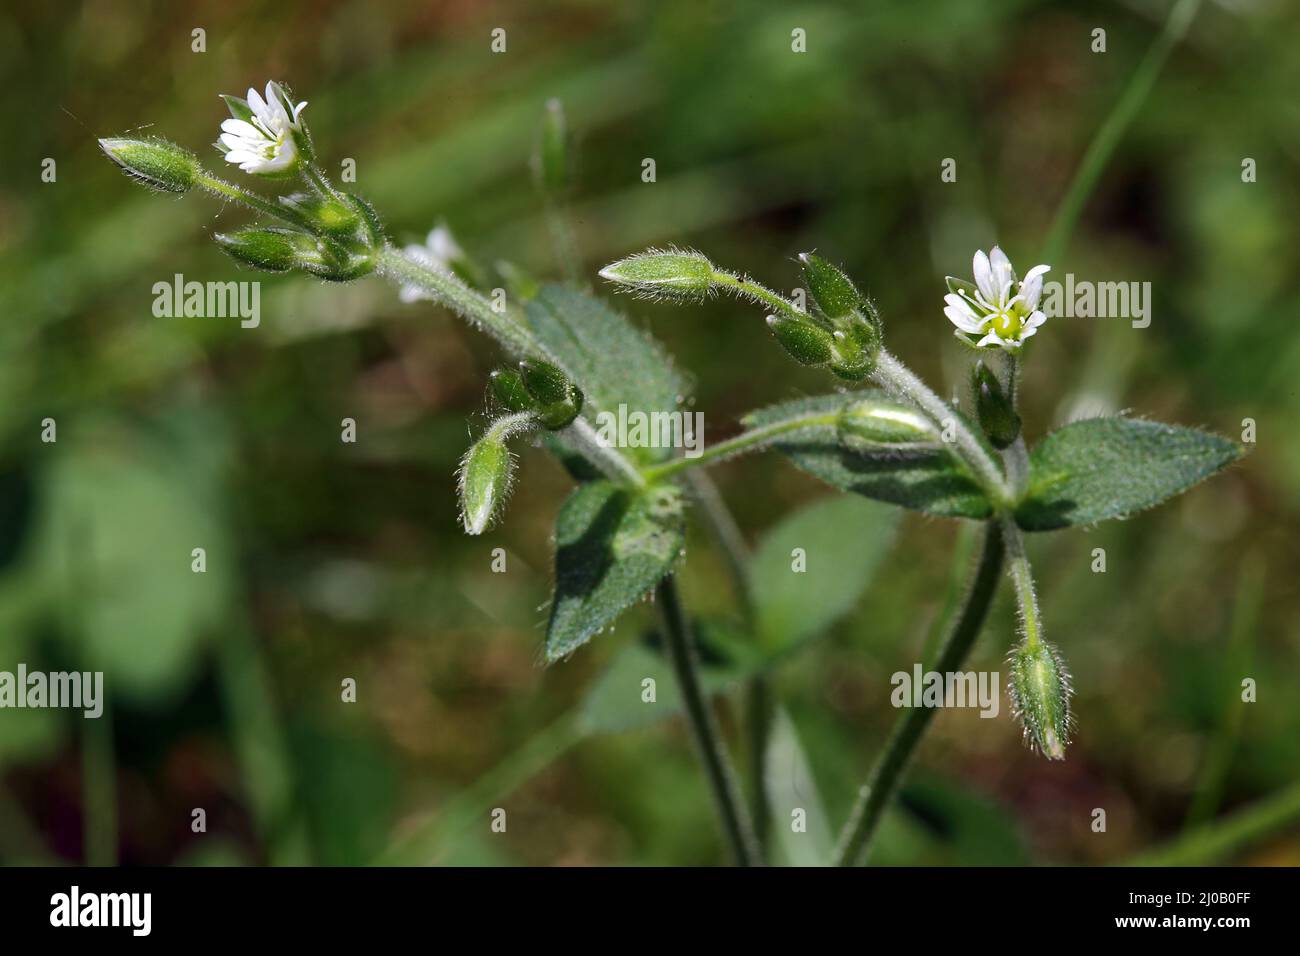 Commom Mouse-Ear Chickweed, Cerastium holosteoides Stock Photo